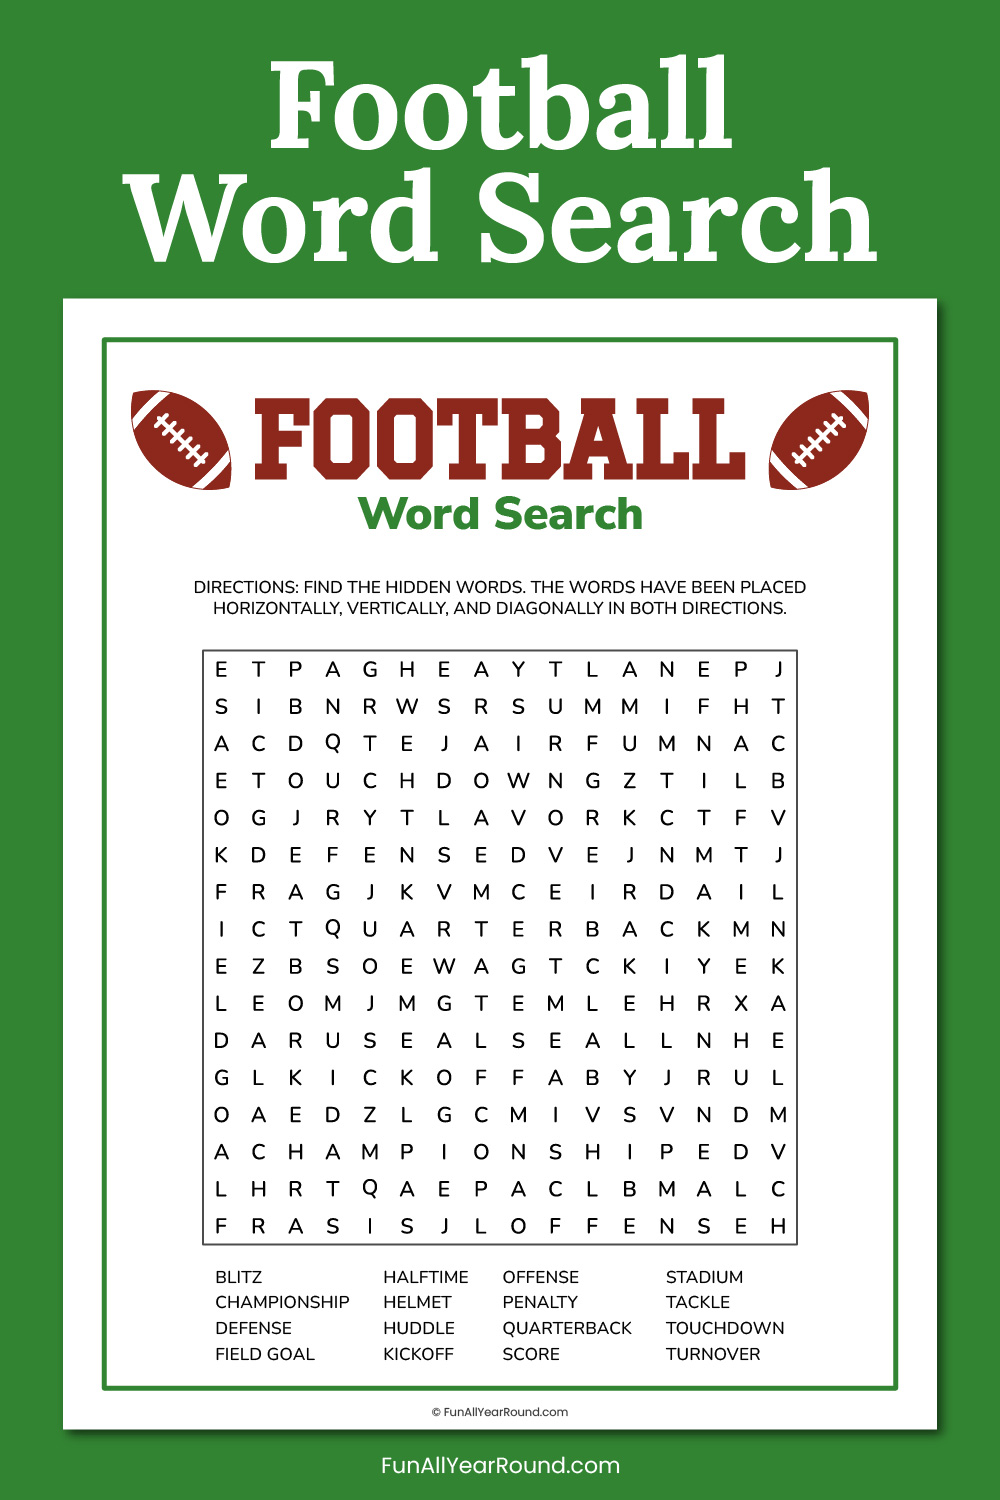 Football word search